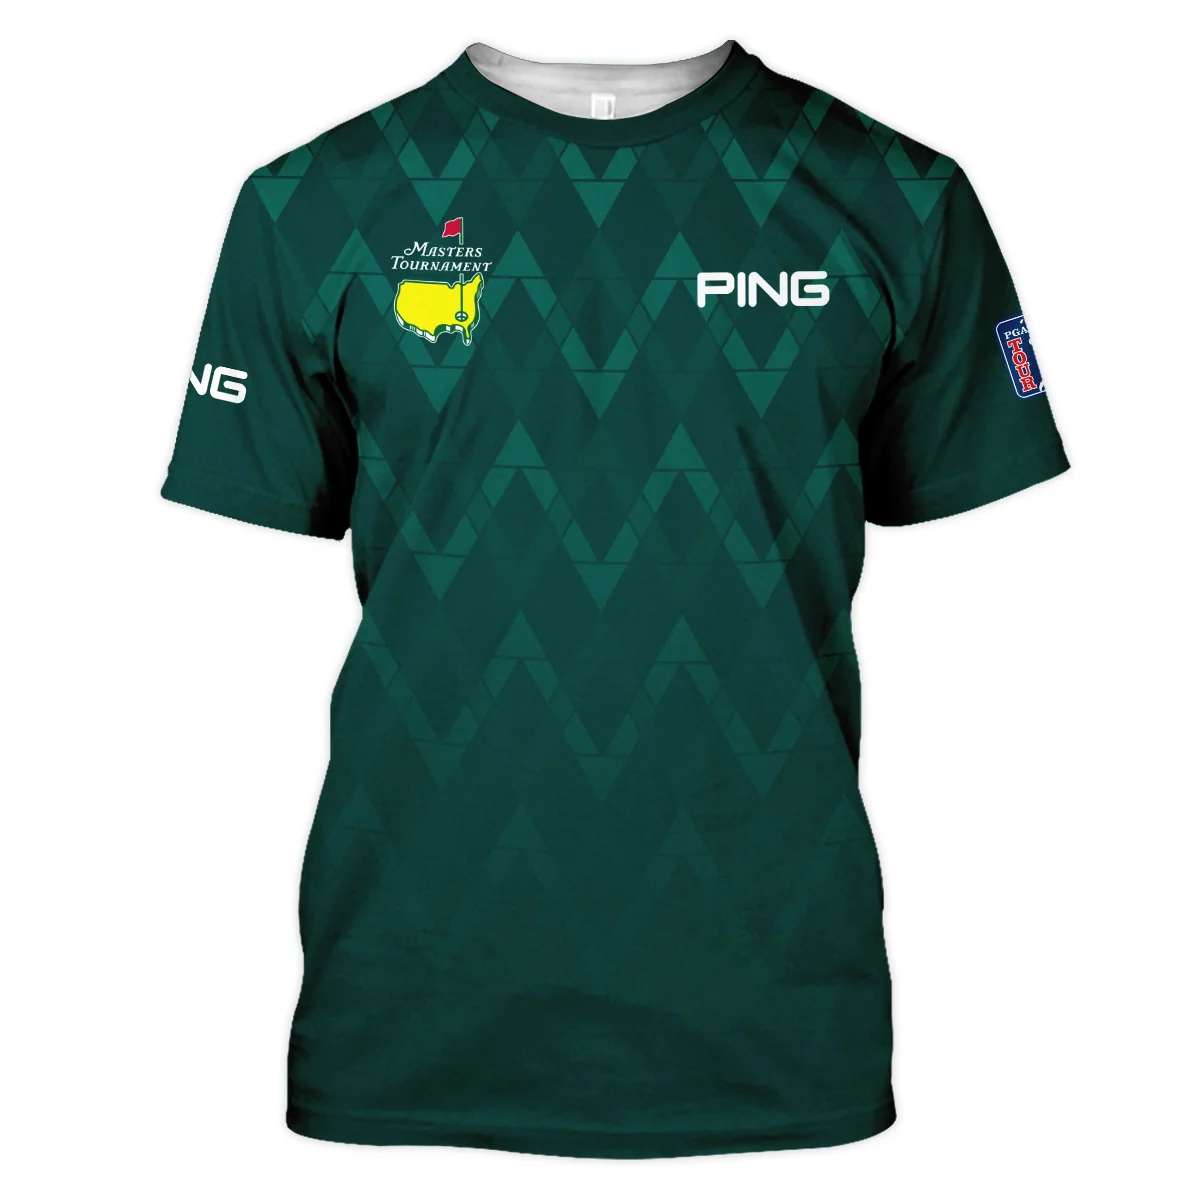 Abstract Dark Green Zigzag Background Masters Tournament Ping Vneck Long Polo Shirt Style Classic Long Polo Shirt For Men